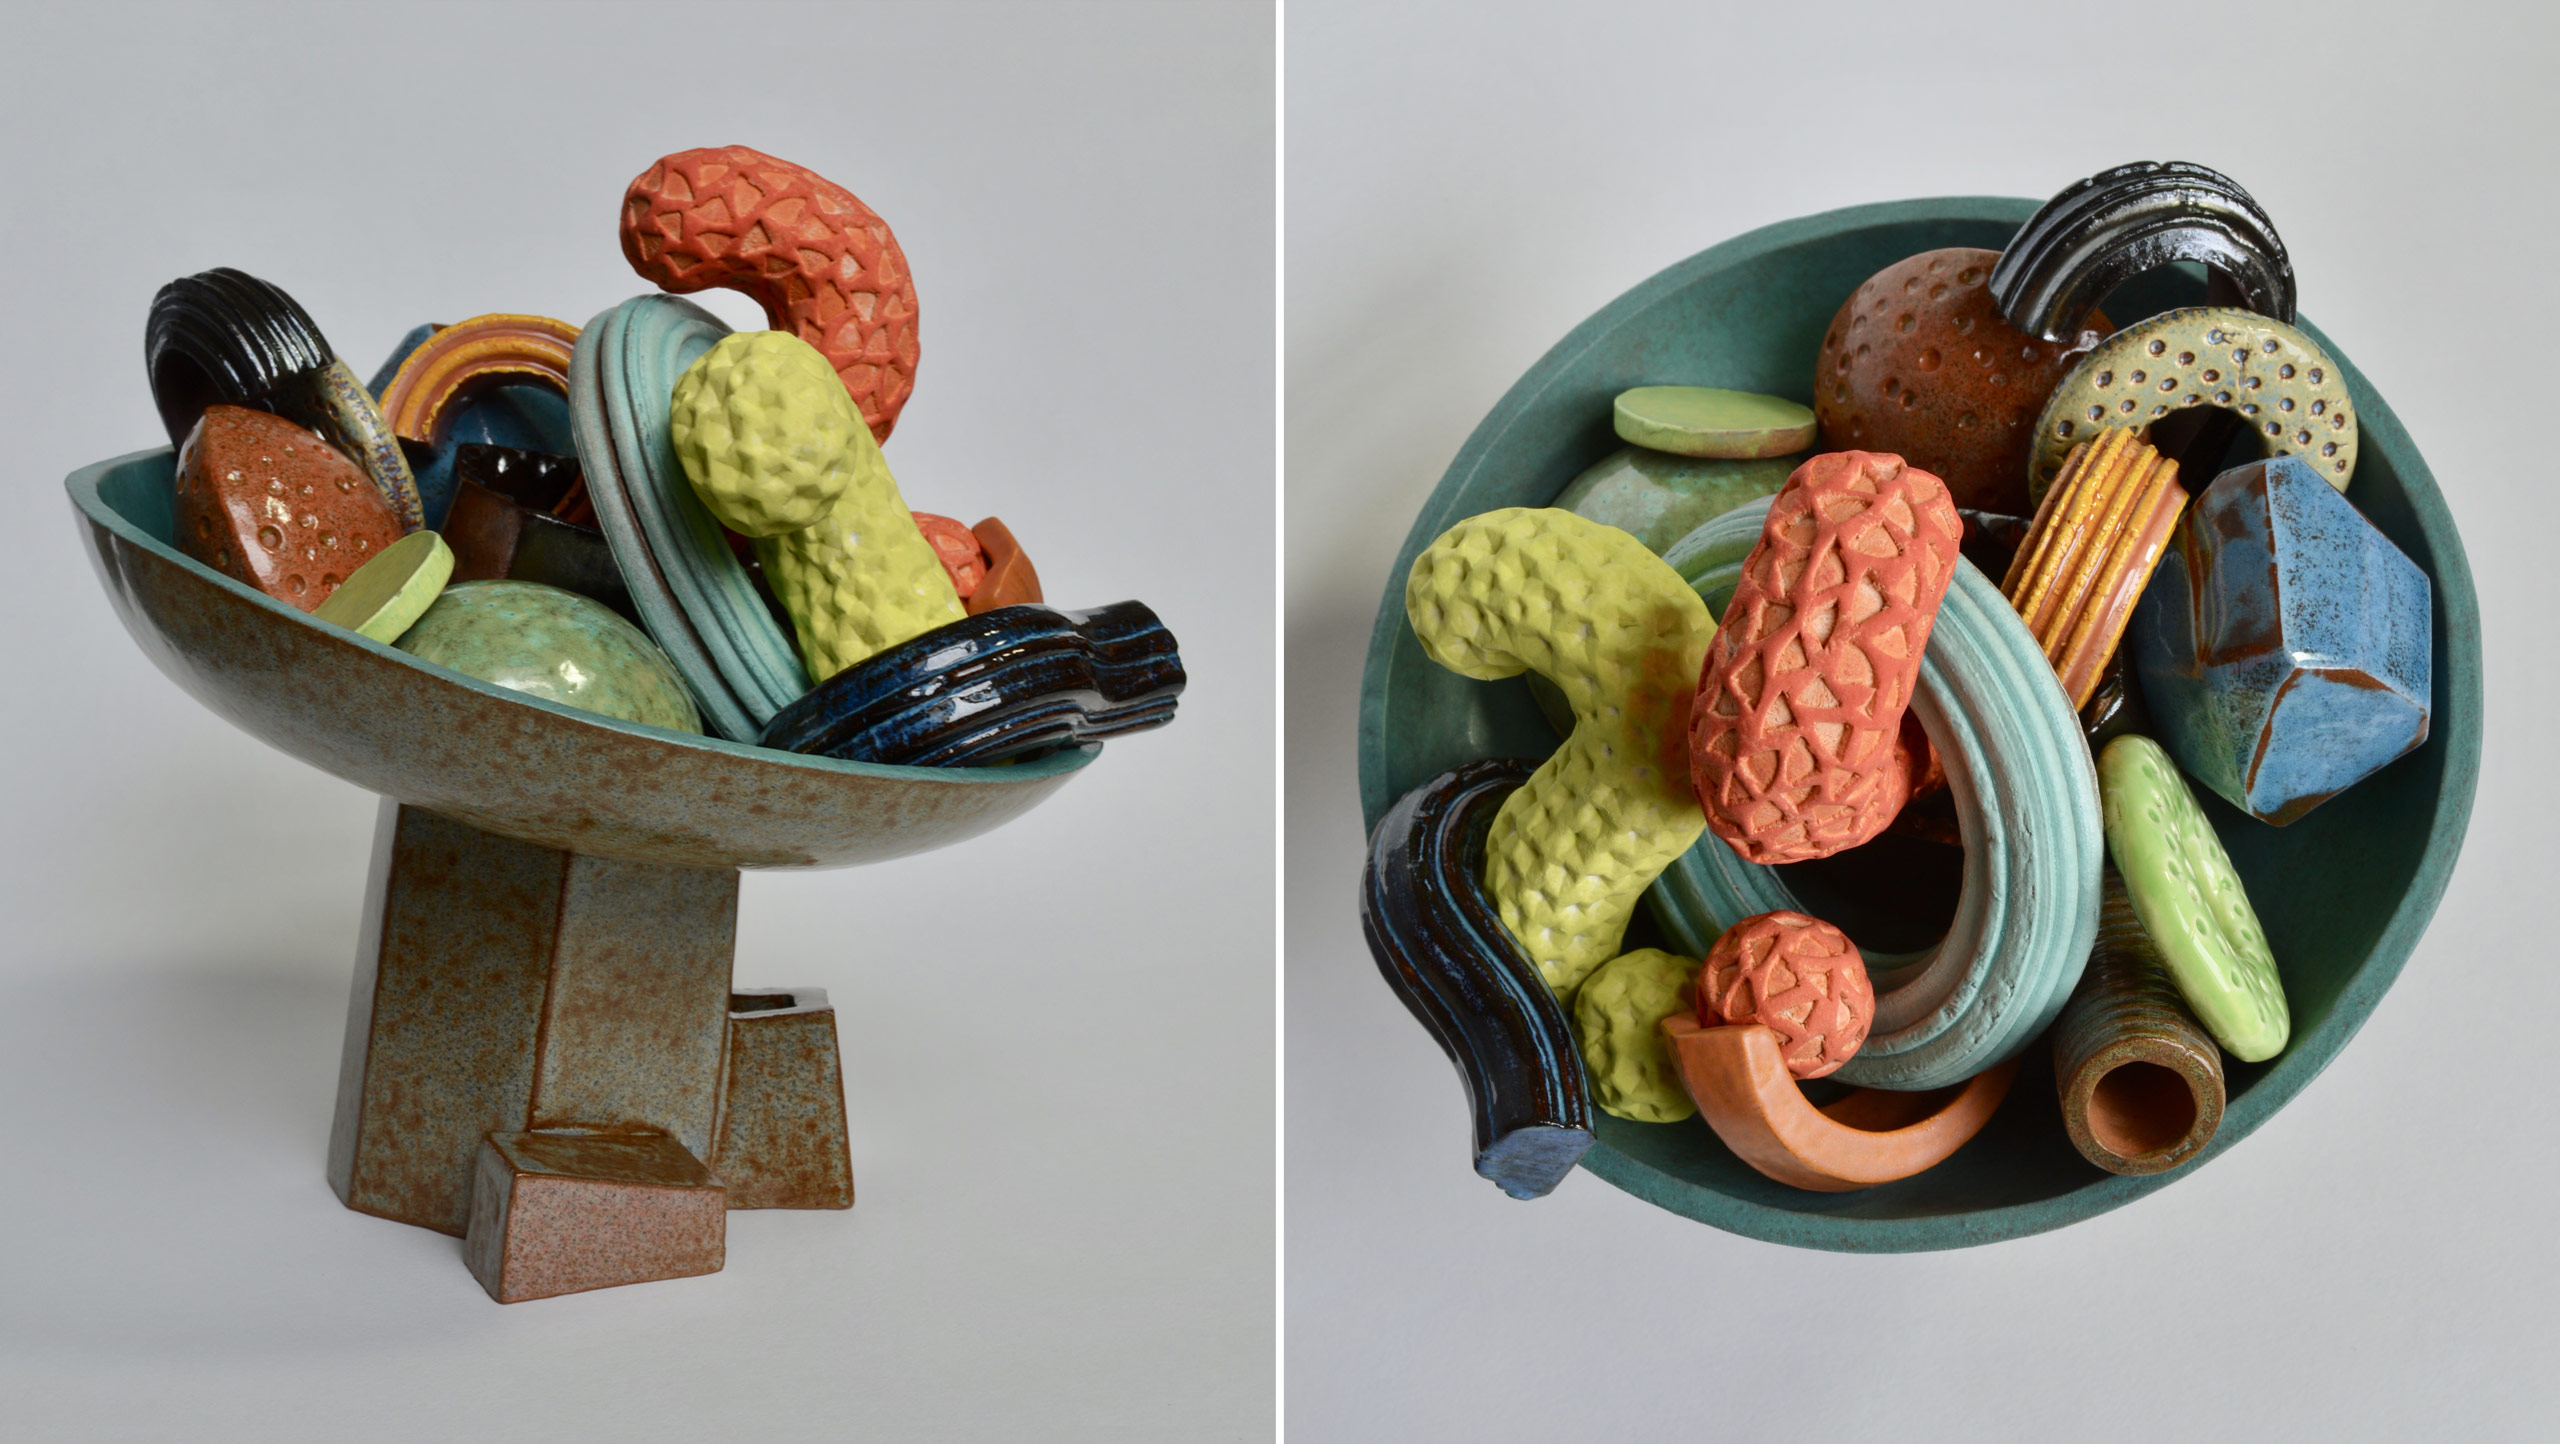 Cornucopia - a ceramic still-life by artist Simon Fell. Double shot of a group of highly coloured geometric objects in a bowl on a stand